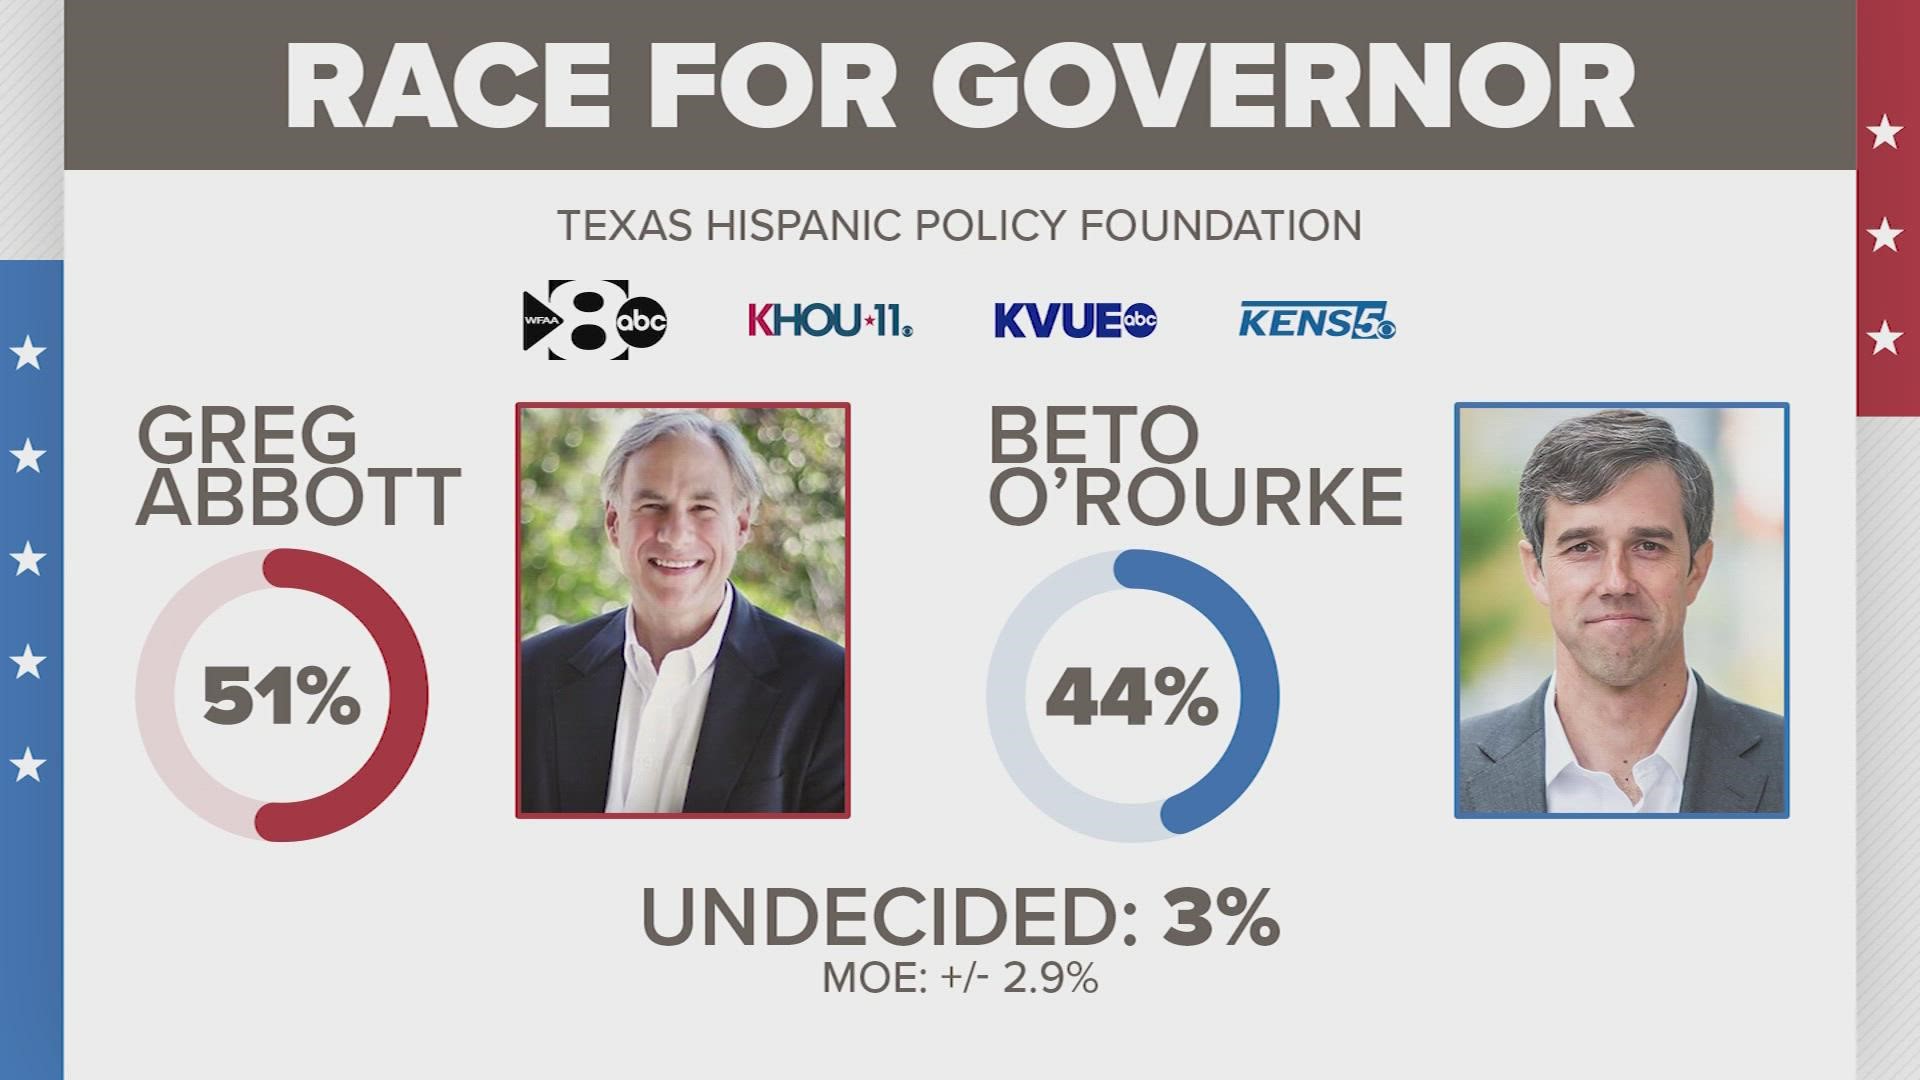 Gov. Greg Abbott and Beto O'Rourke will meet face to face Friday night for the first time this election for their one and only gubernatorial debate in Edinburg, TX.